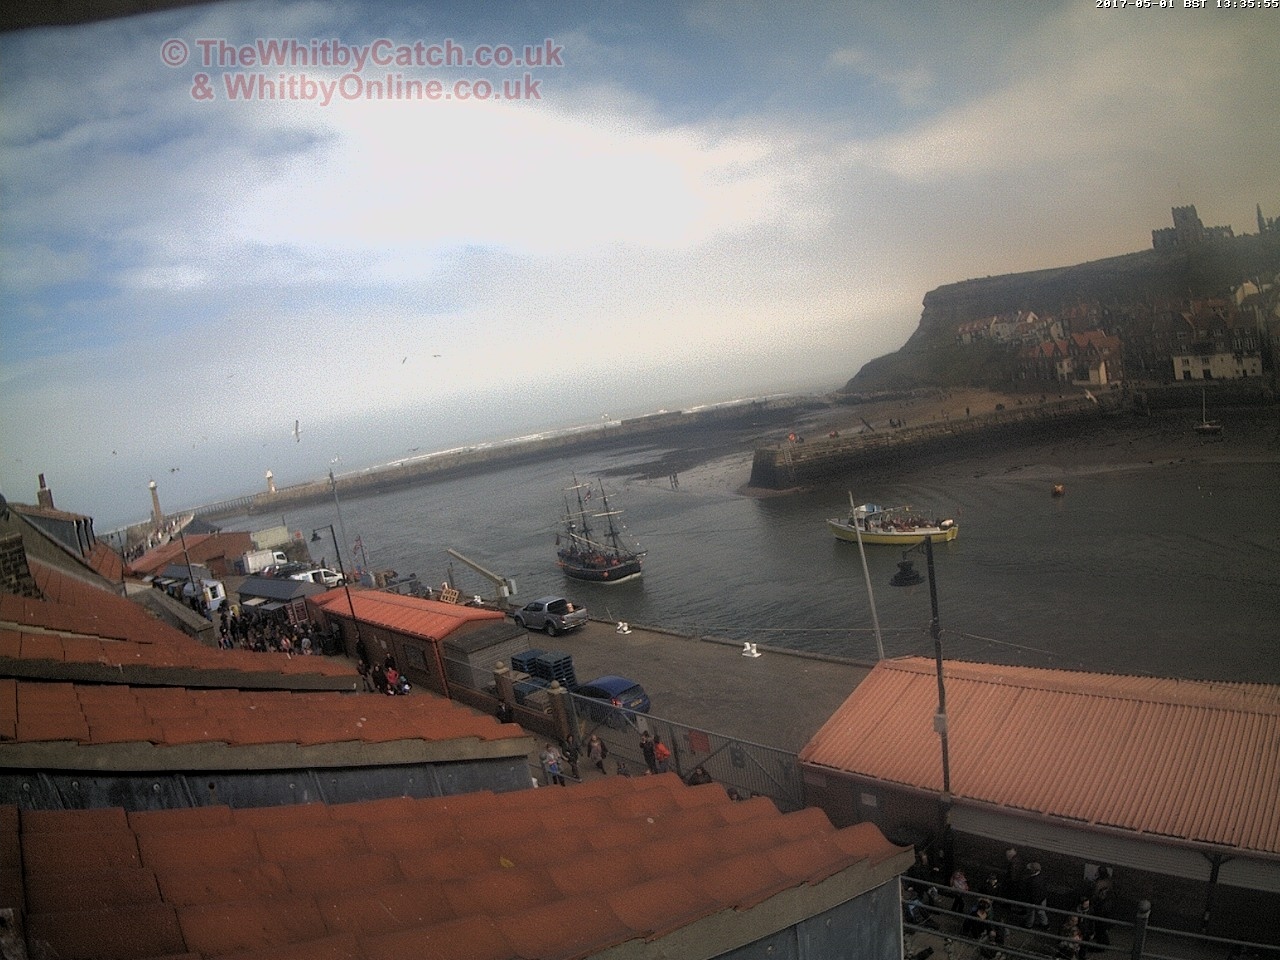 Whitby Mon 1st May 2017 13:36.